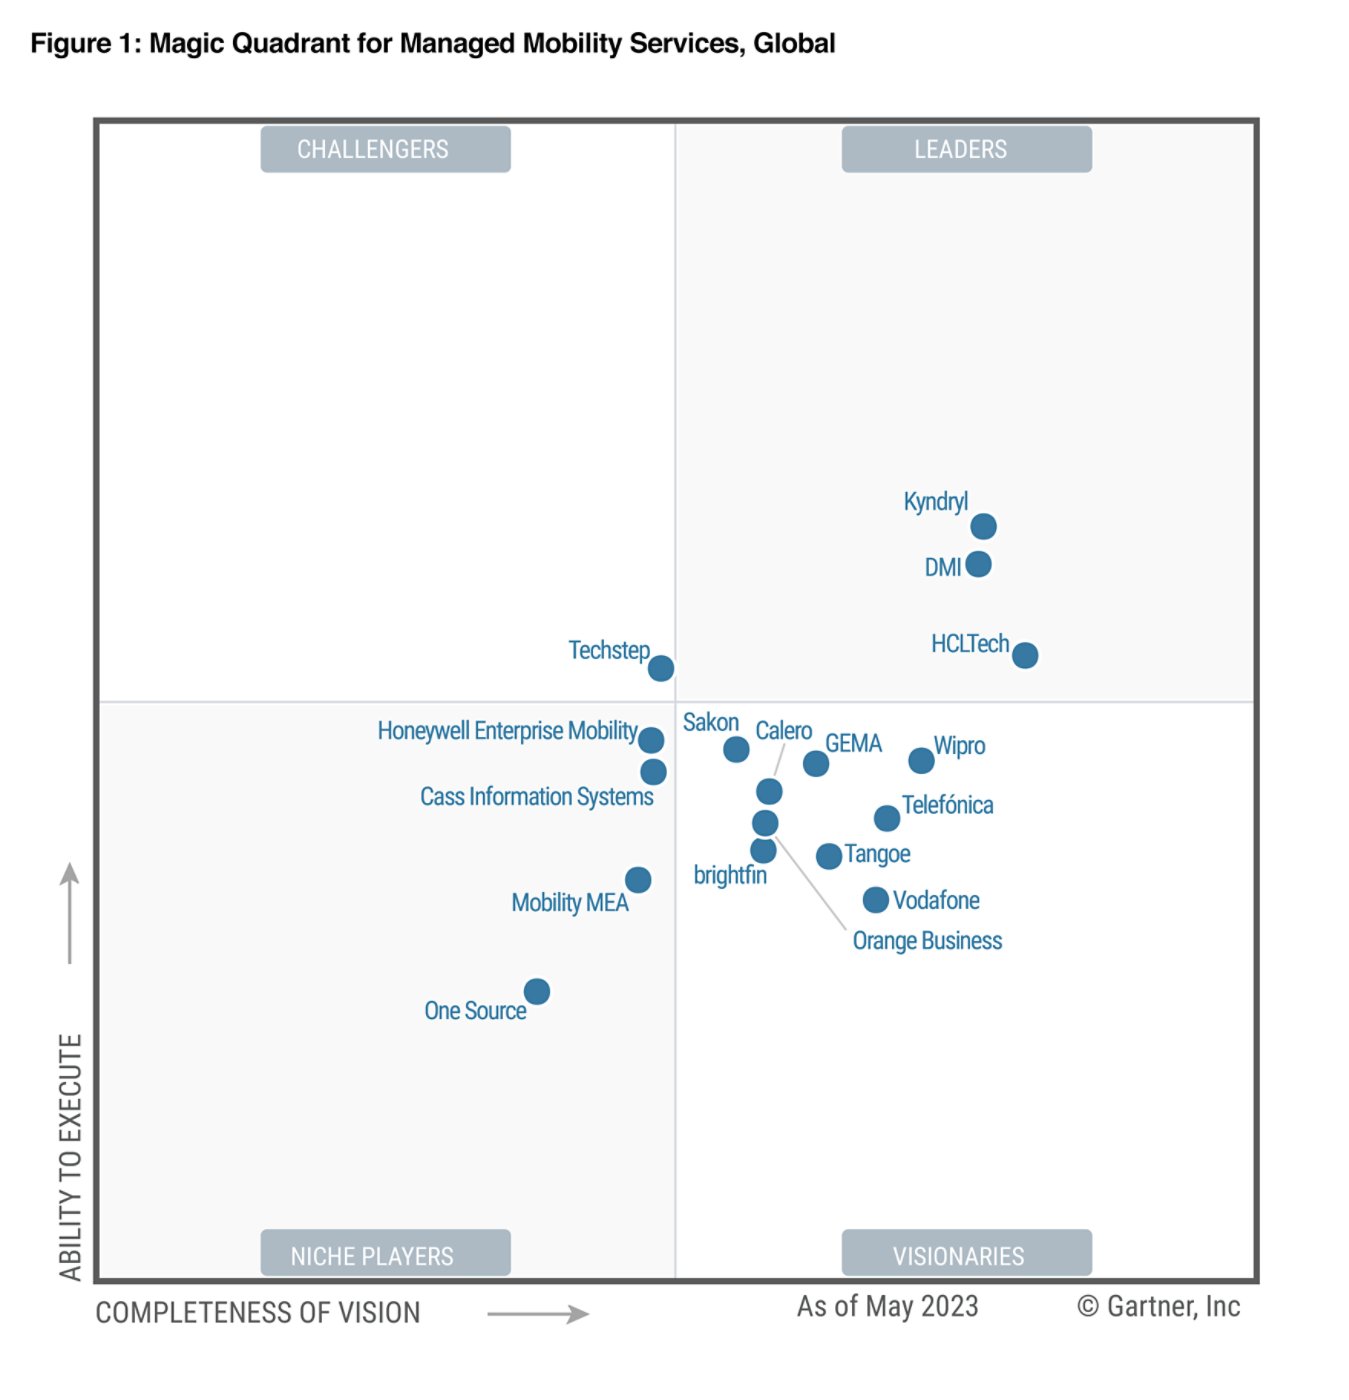 Gartner rates vendors on two criteria areas and positions them in one of four quadrants: leaders, challengers, visionaries, niche players. Kyndryl is positioned in this leader quadrant. 